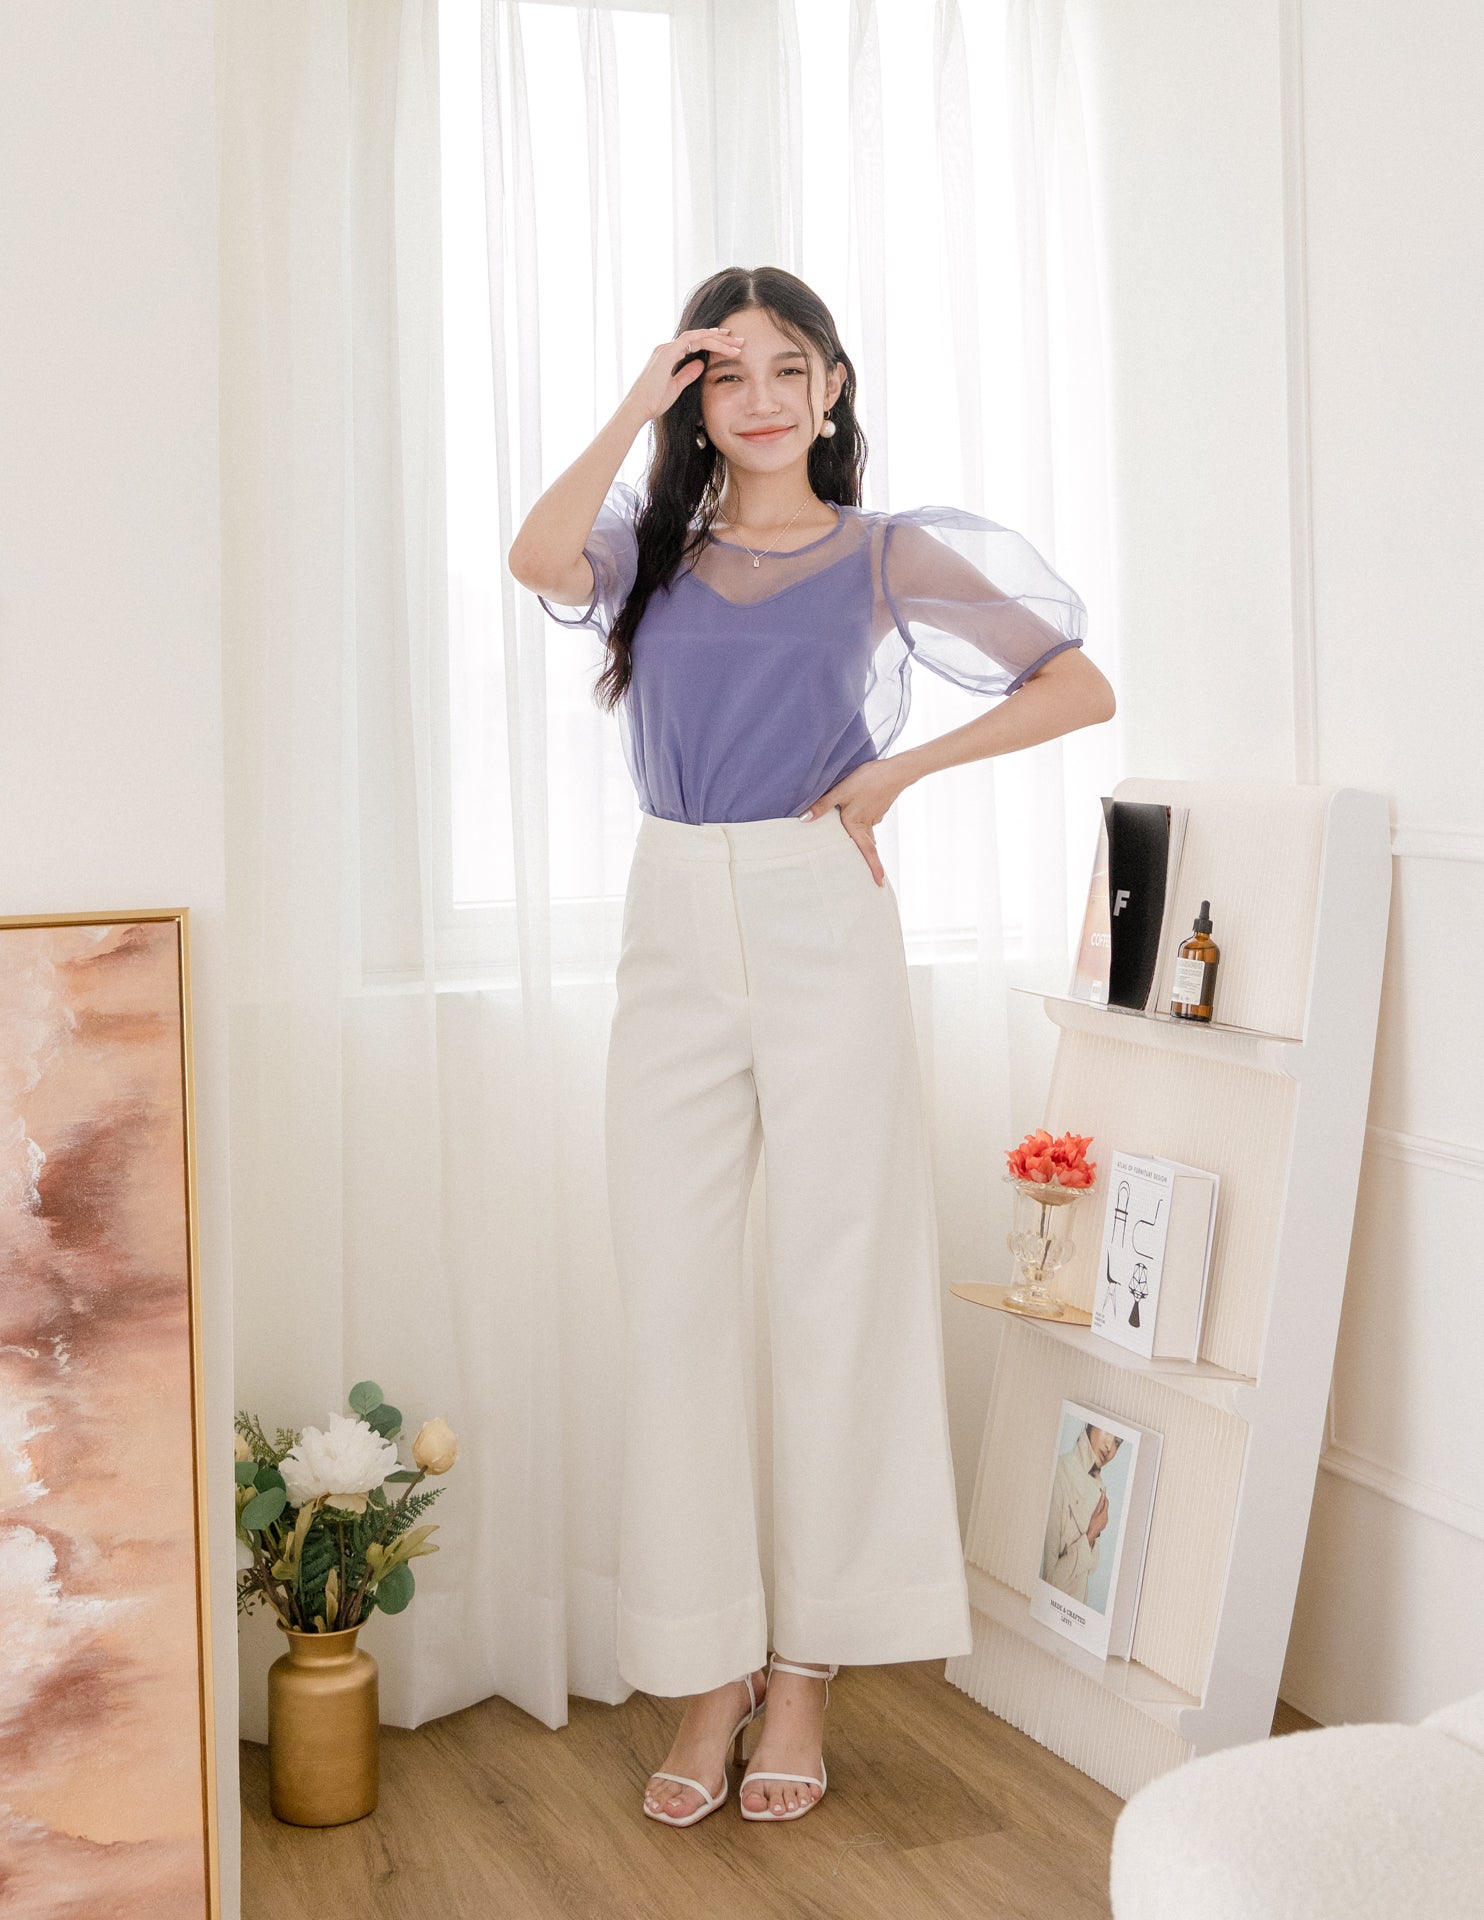 Maisie Pants in White